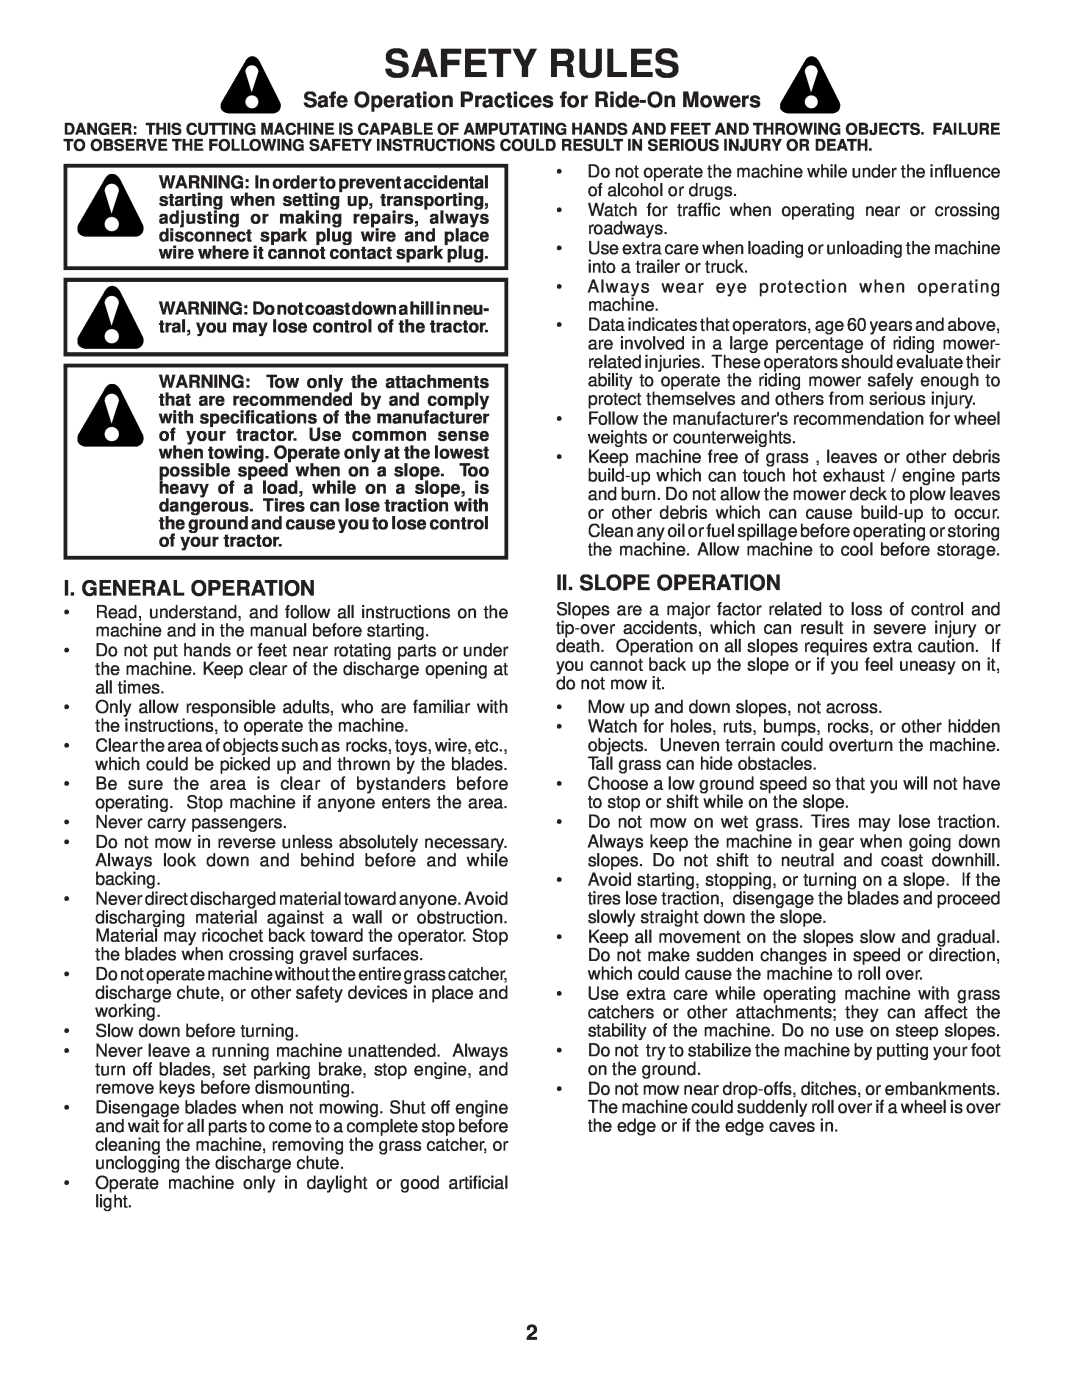 Husqvarna YTH2648 TF Safety Rules, Safe Operation Practices for Ride-On Mowers, I. General Operation, Ii. Slope Operation 